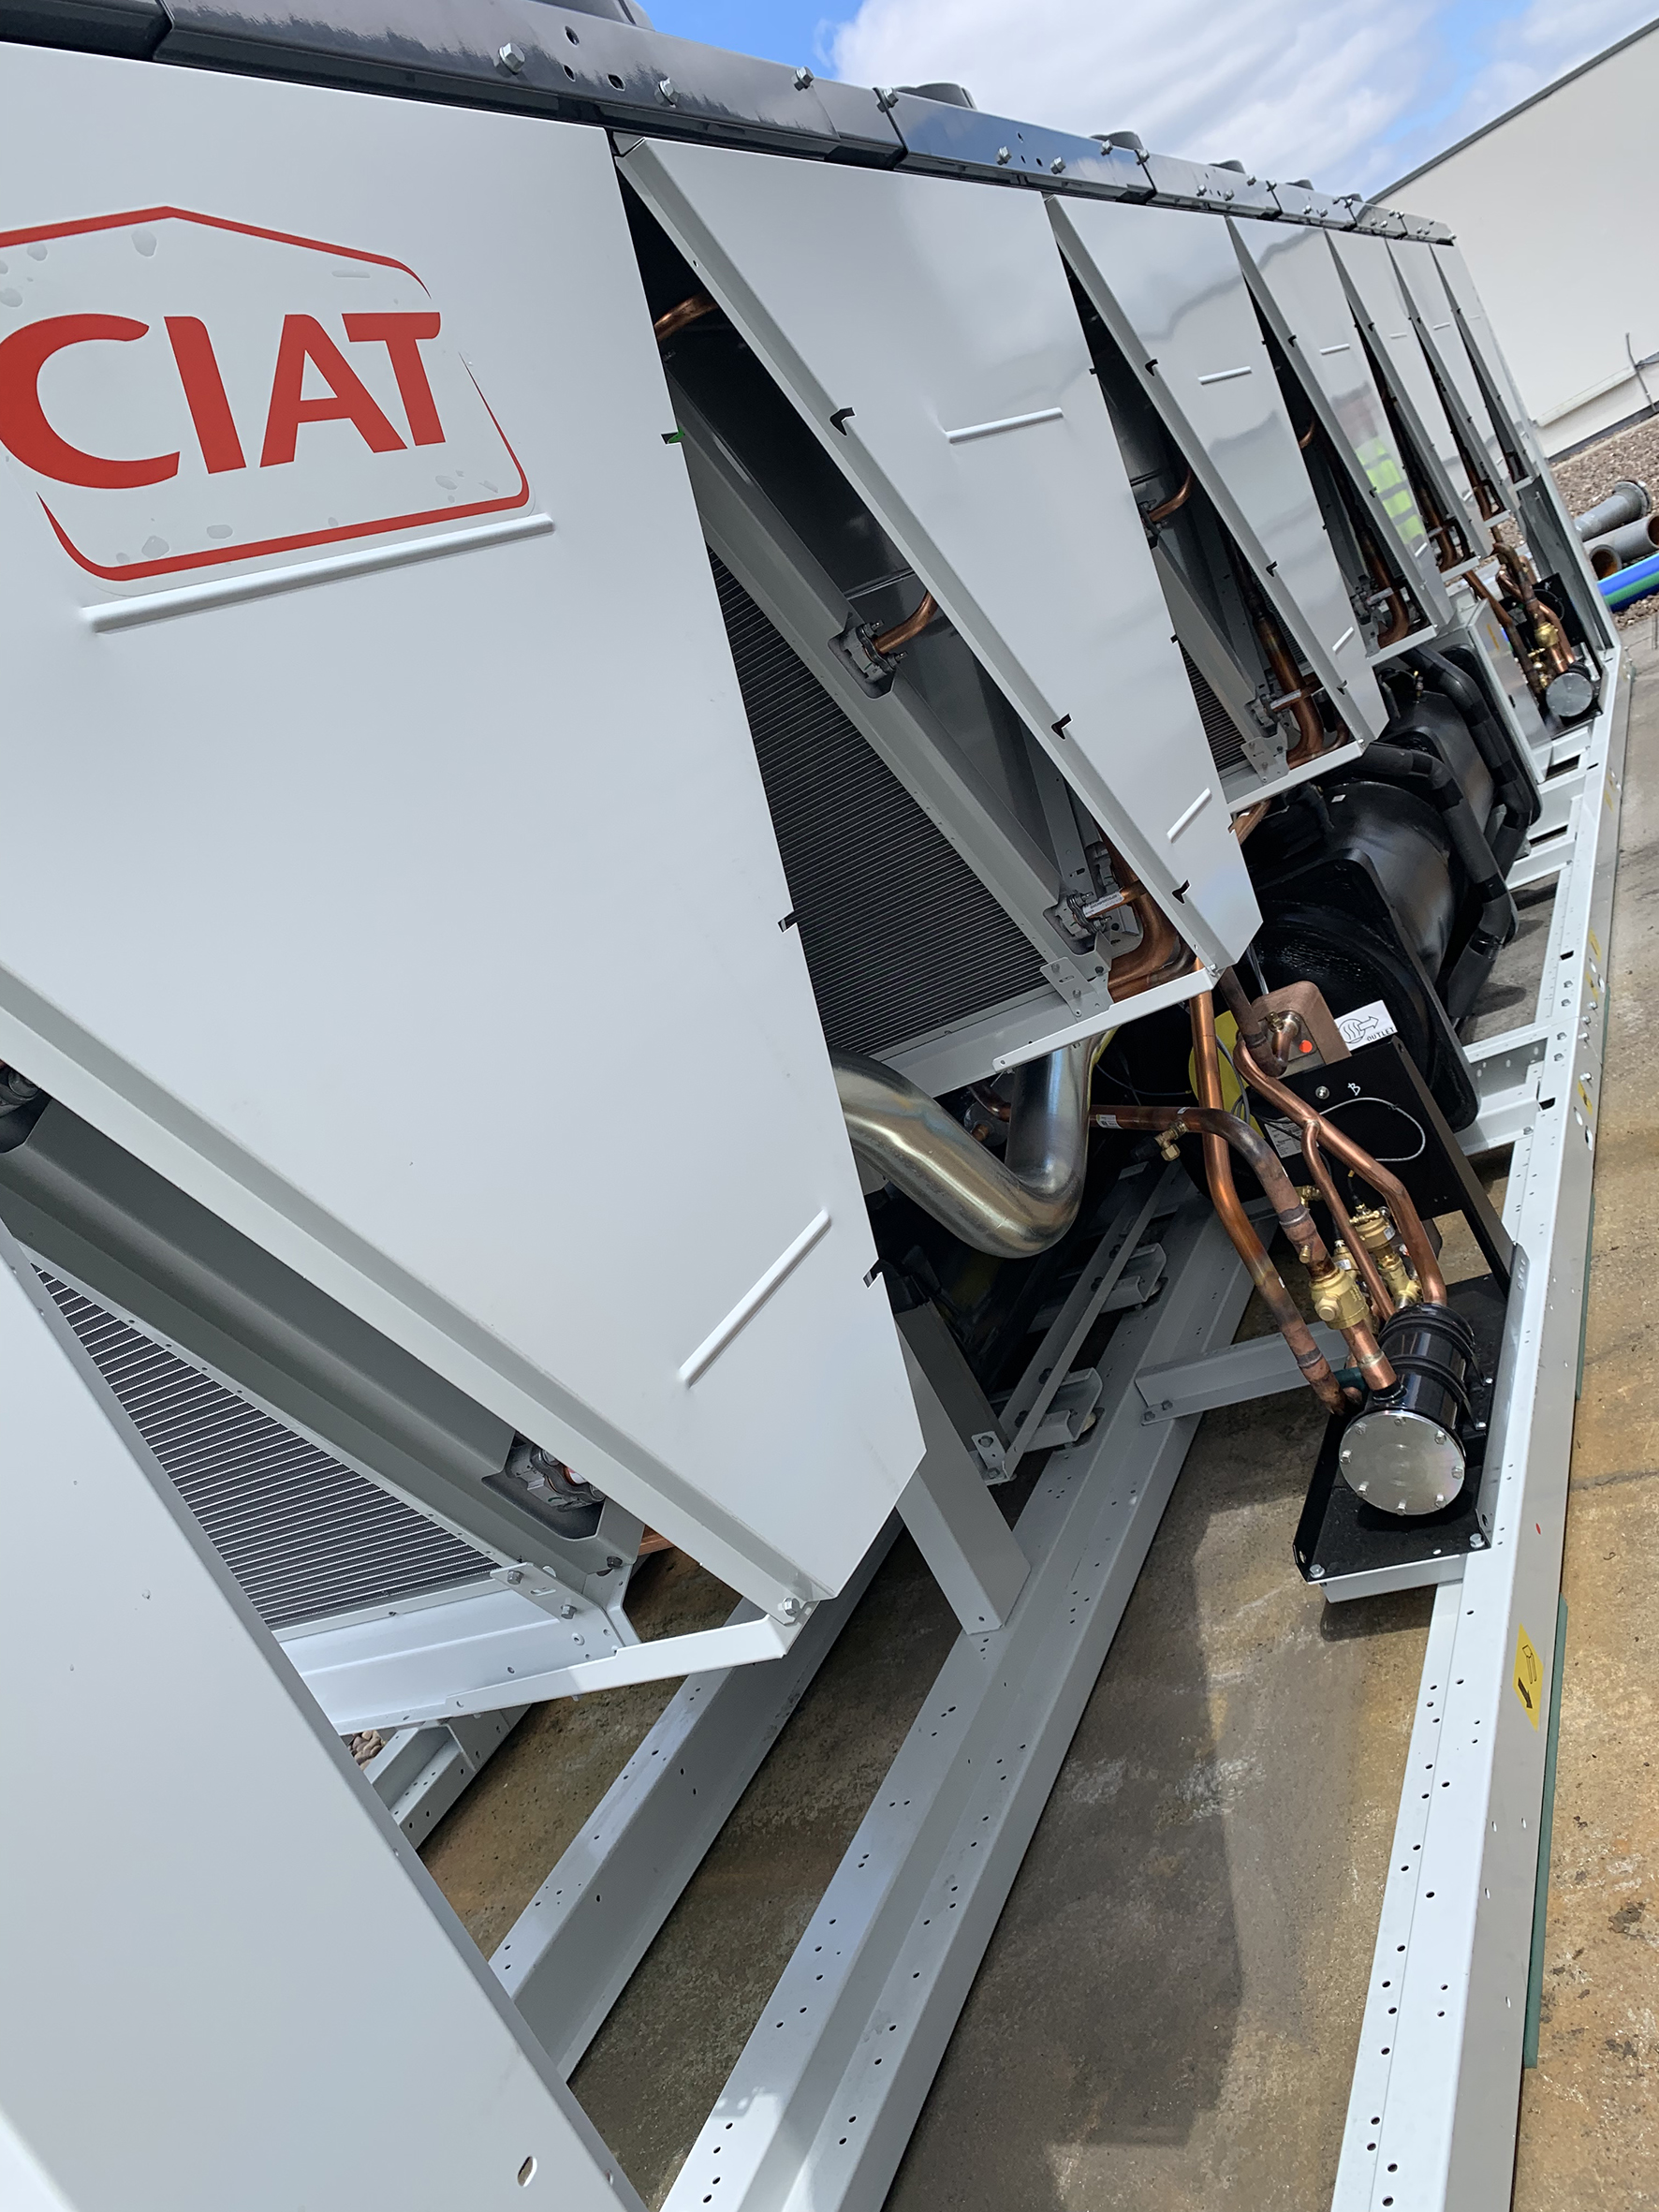 CIAT Delivers Chiller Replacement at London Hospital on Hottest Day Ever Recorded in UK